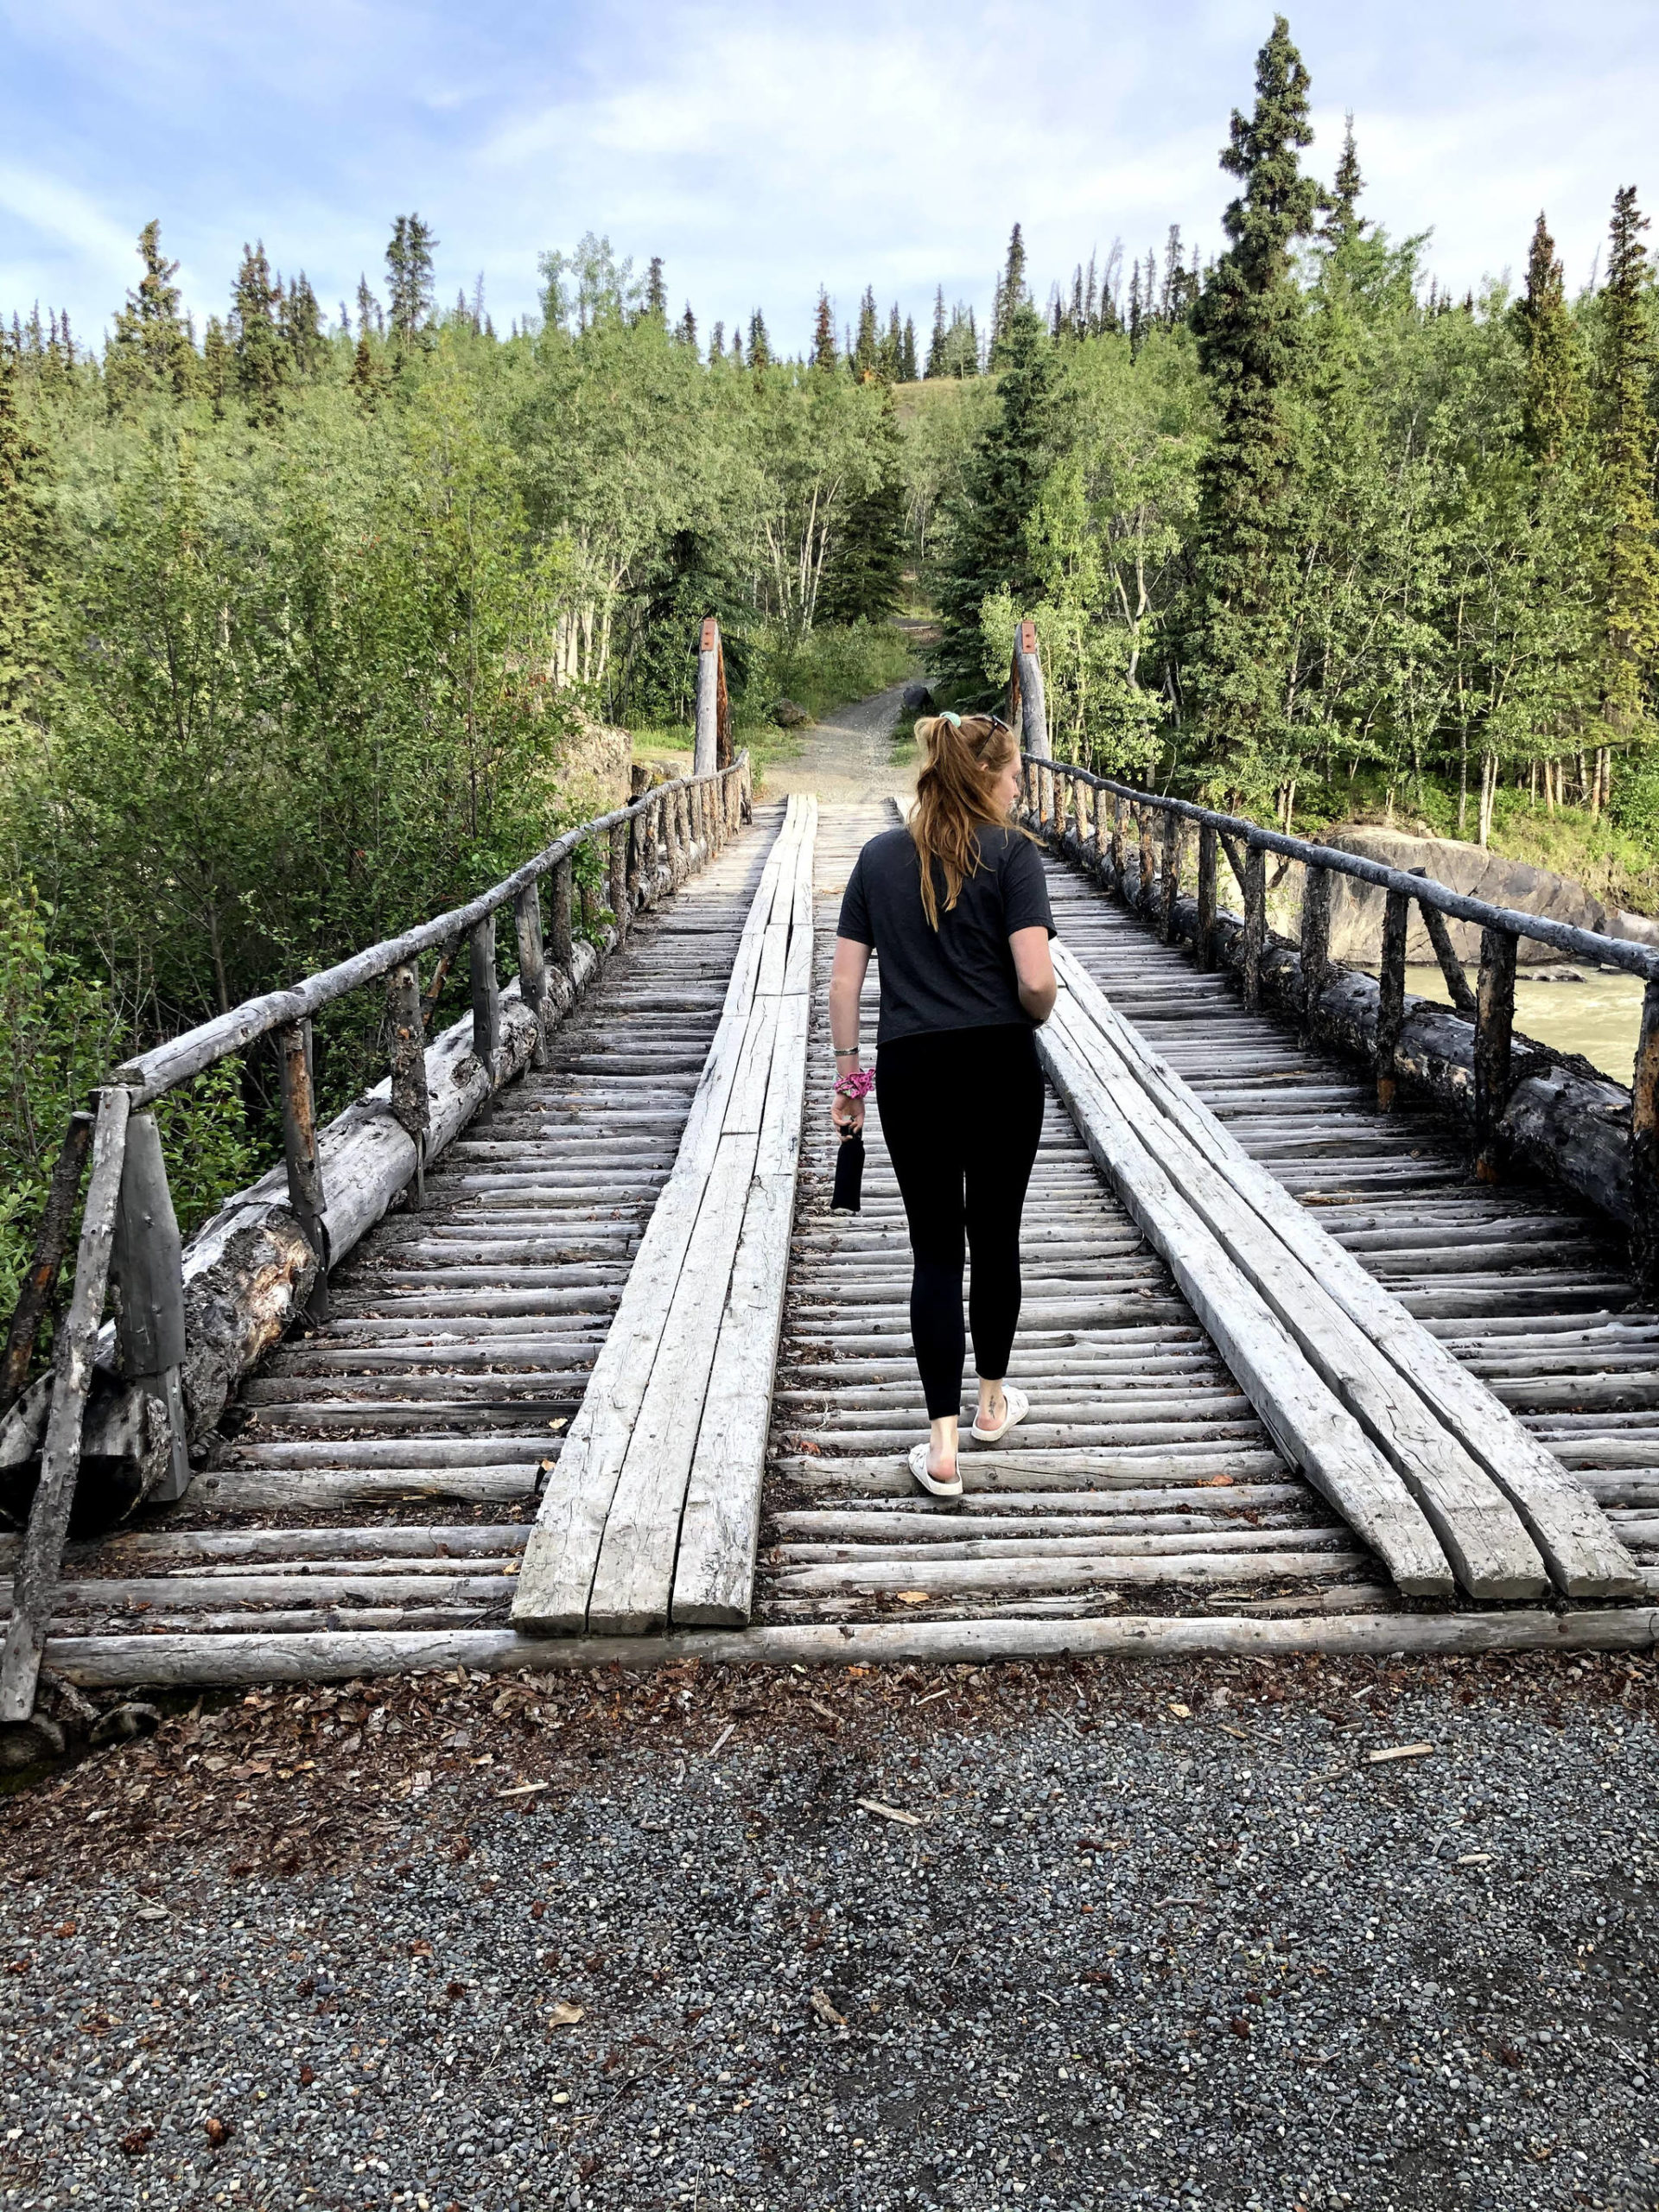 Camille Botello crosses a bridge with her bear spray in a rest stop area off the Alaska Highway on July 17, 2020. (Photo provided)